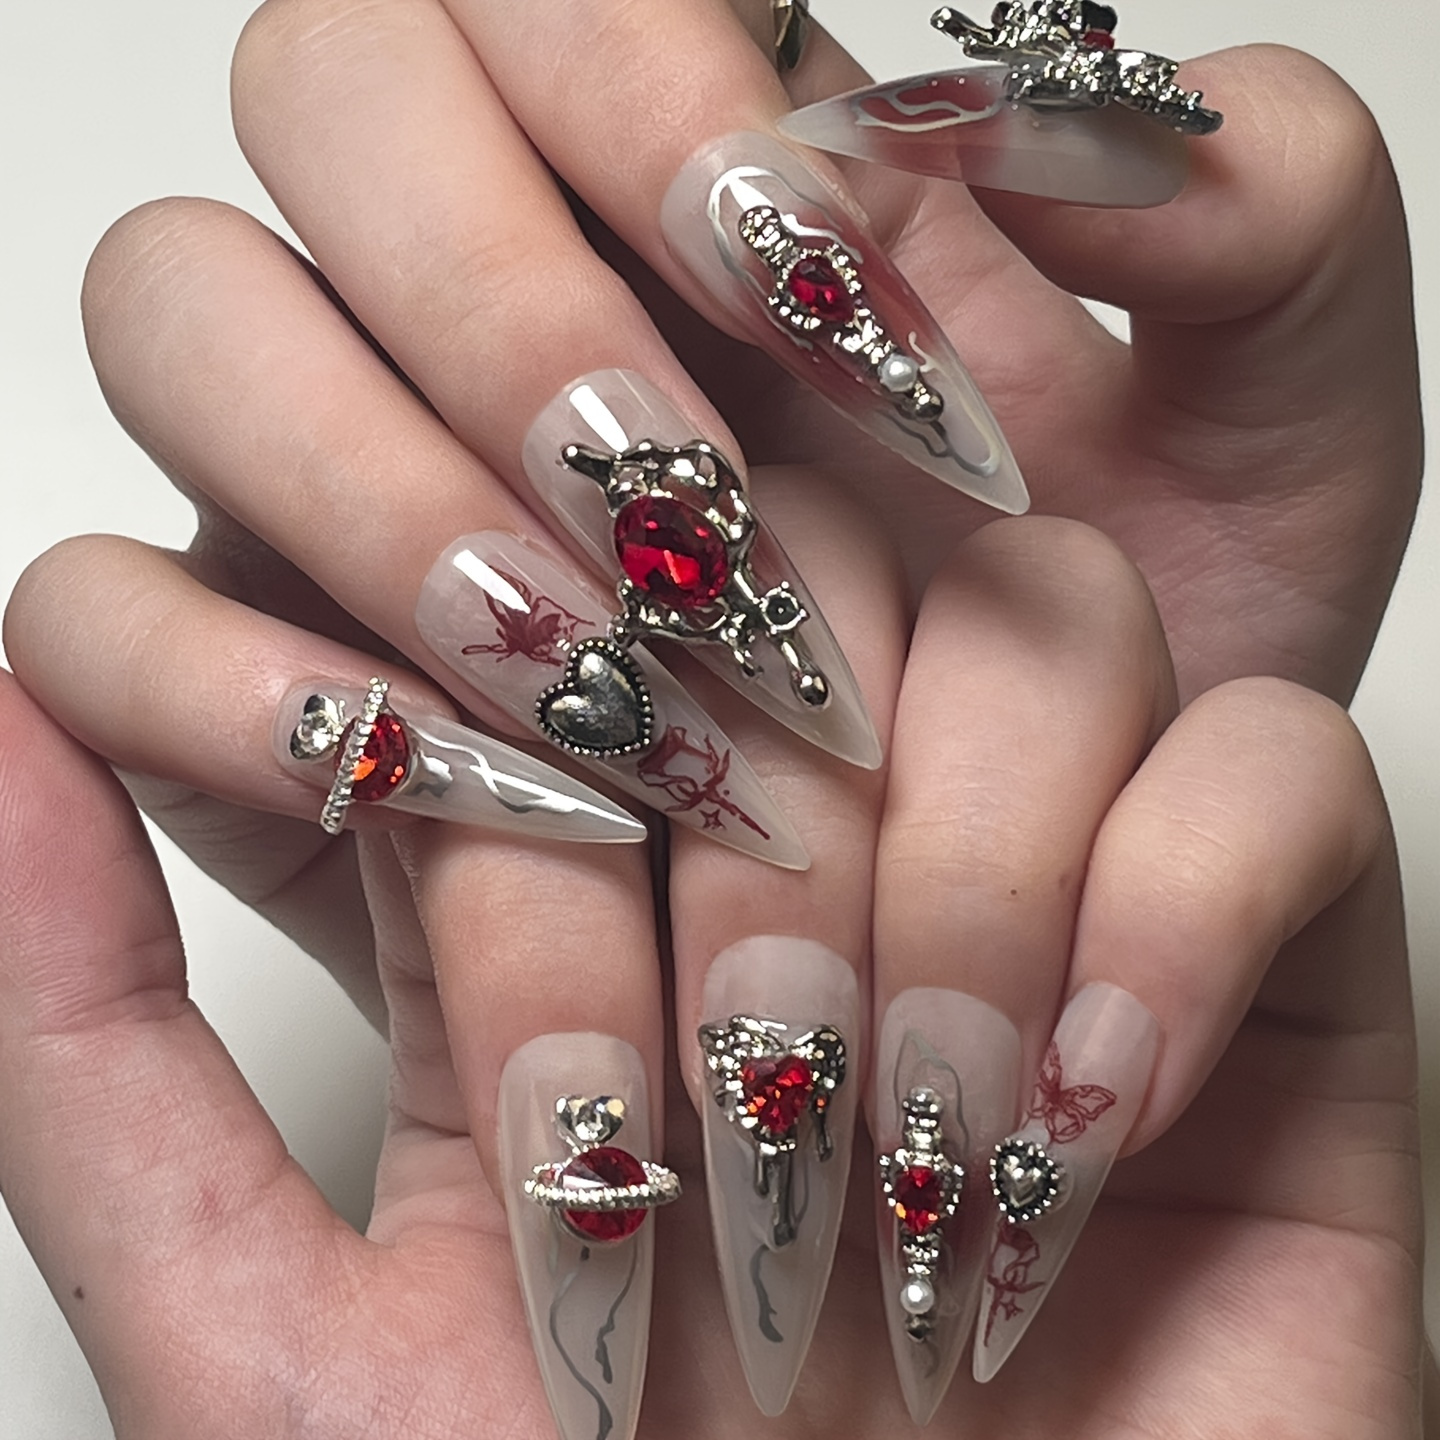 

24pcs Long Almond Shape Press On Nails, Red Blush Fake Nail With 3d Metal Charms Decor, Full Cover Y2k Nails For Women